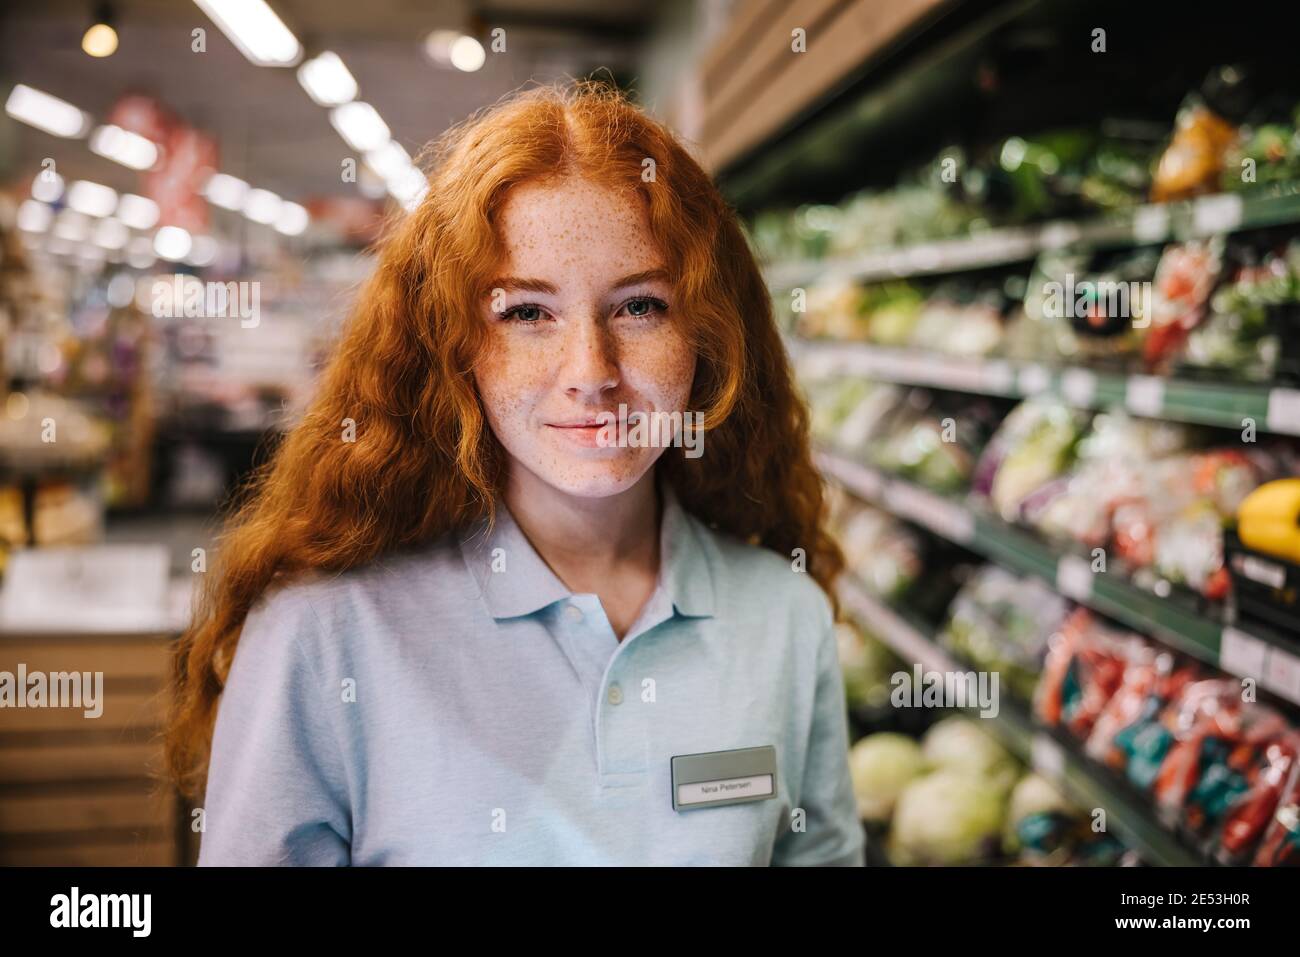 Closeup of a female student on holiday job at grocery store. Woman working in supermarket. Stock Photo